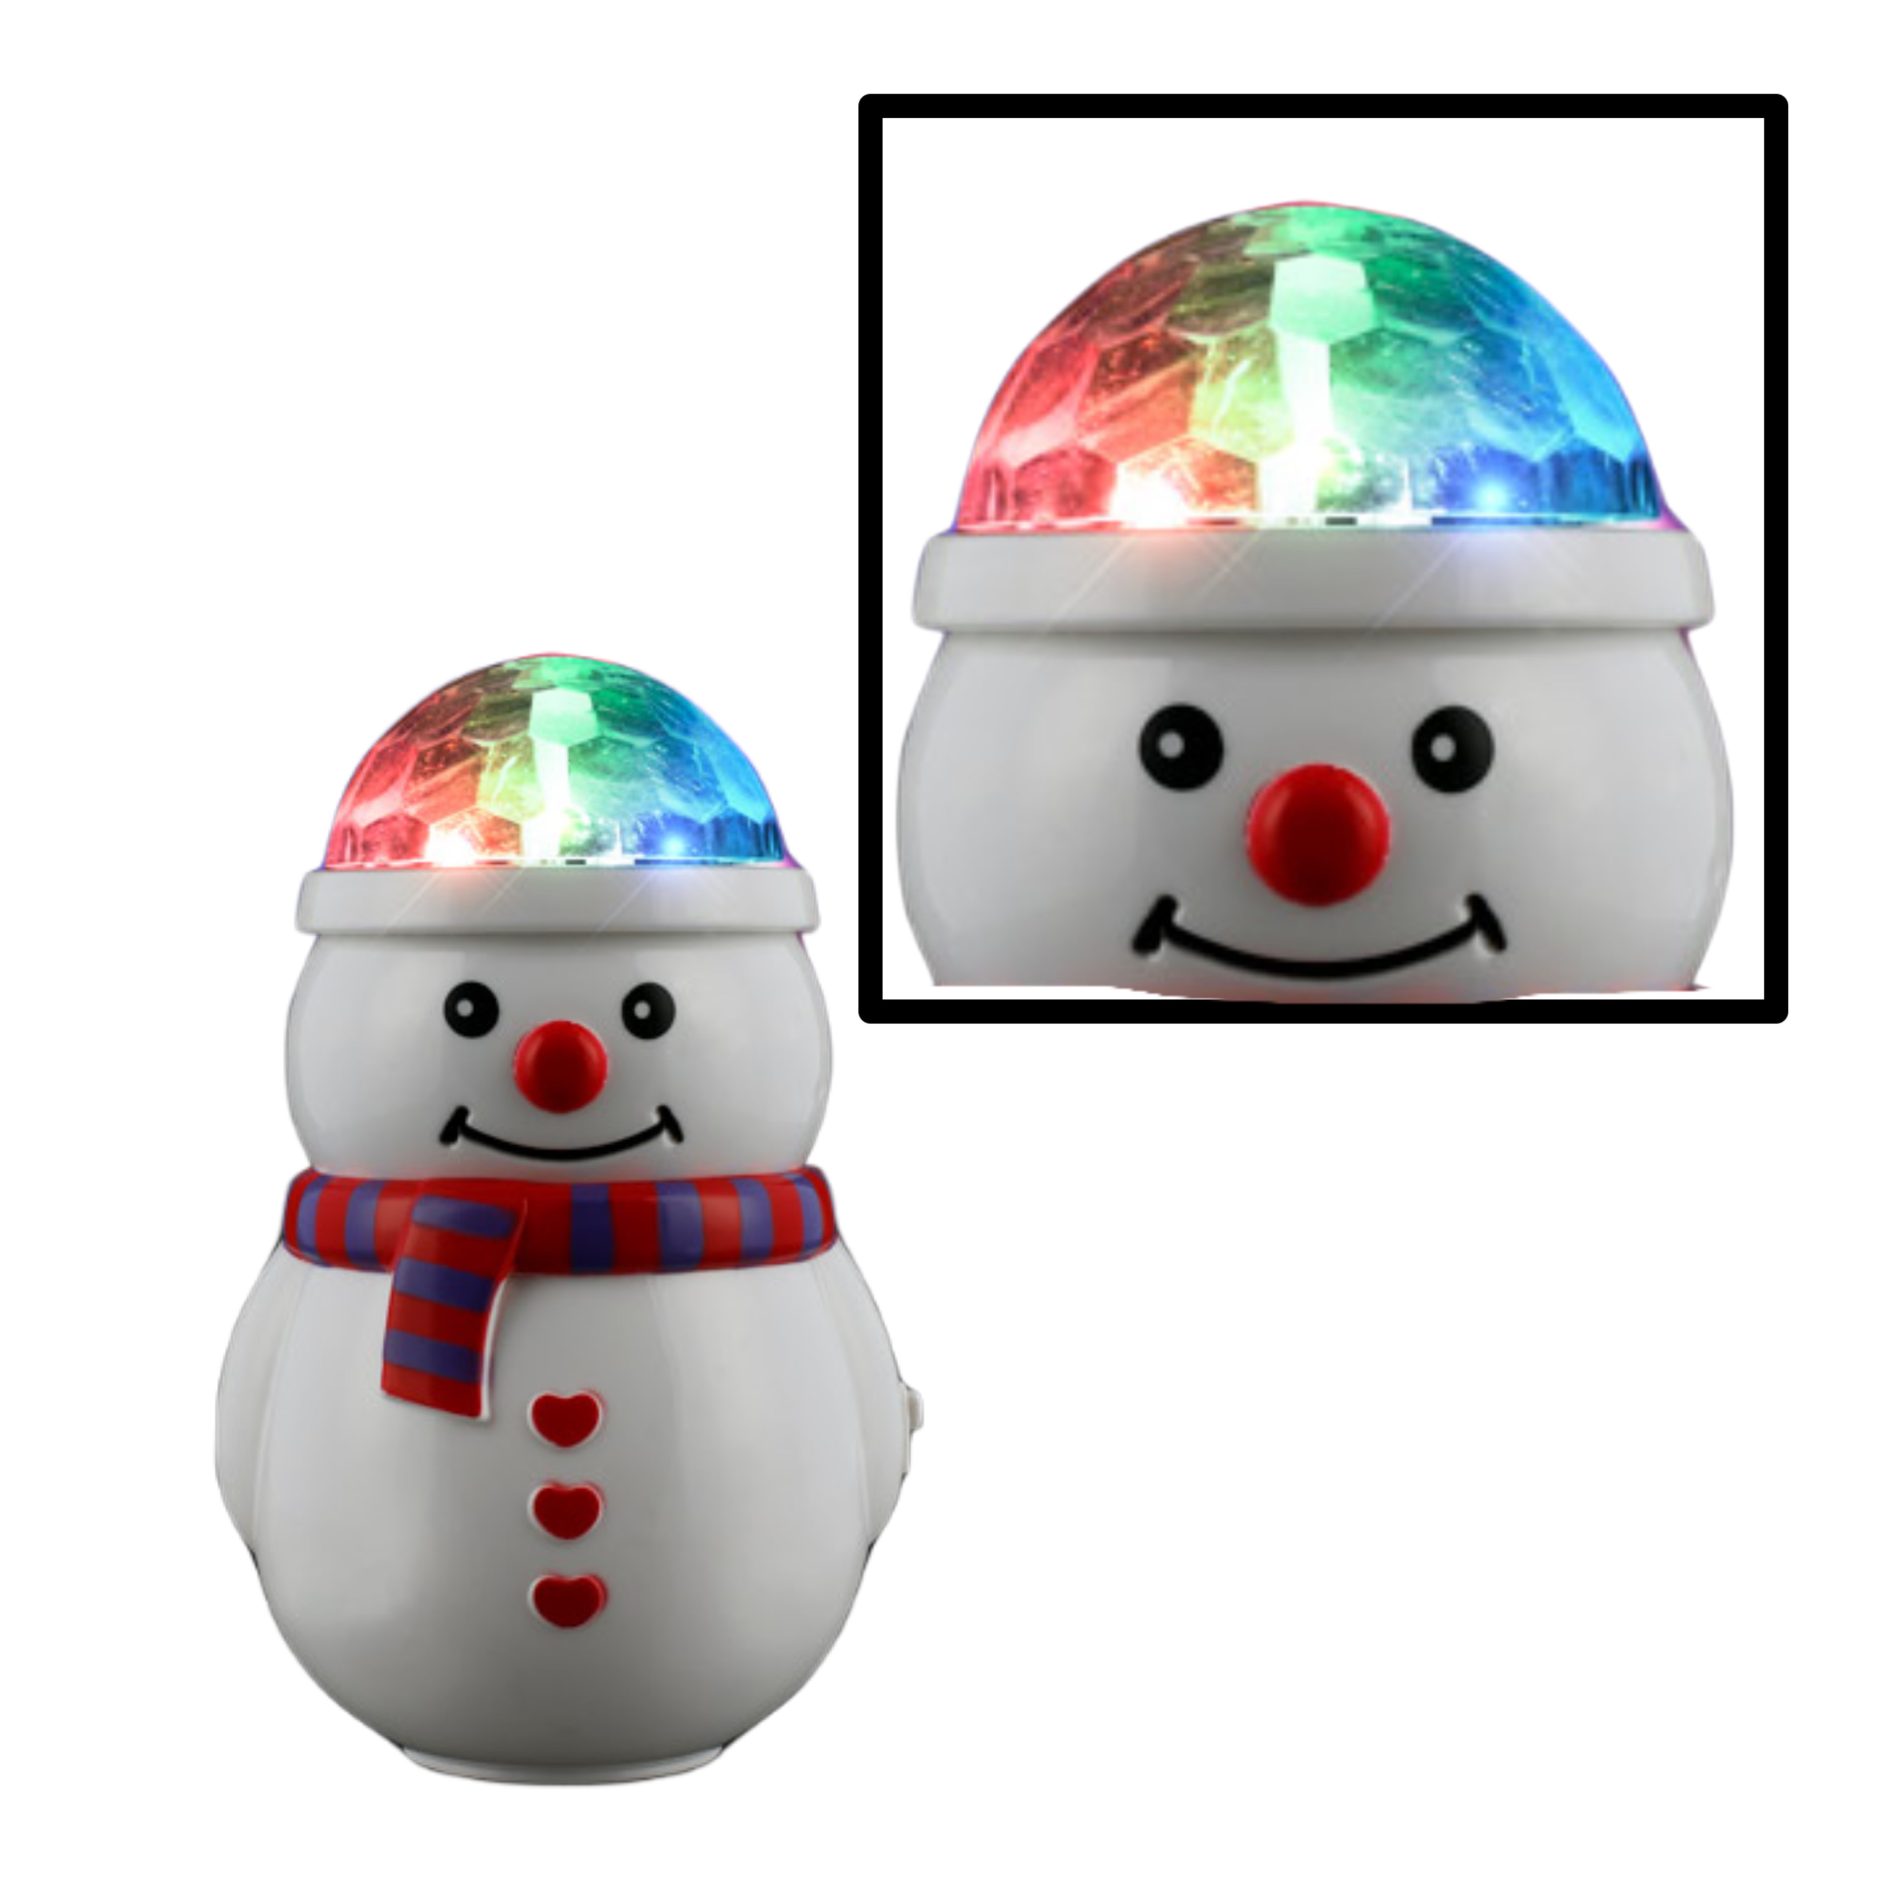 Light Up Christmas Snowman Glowing Prism Projector Home Decoration Centerpiece All Products 5